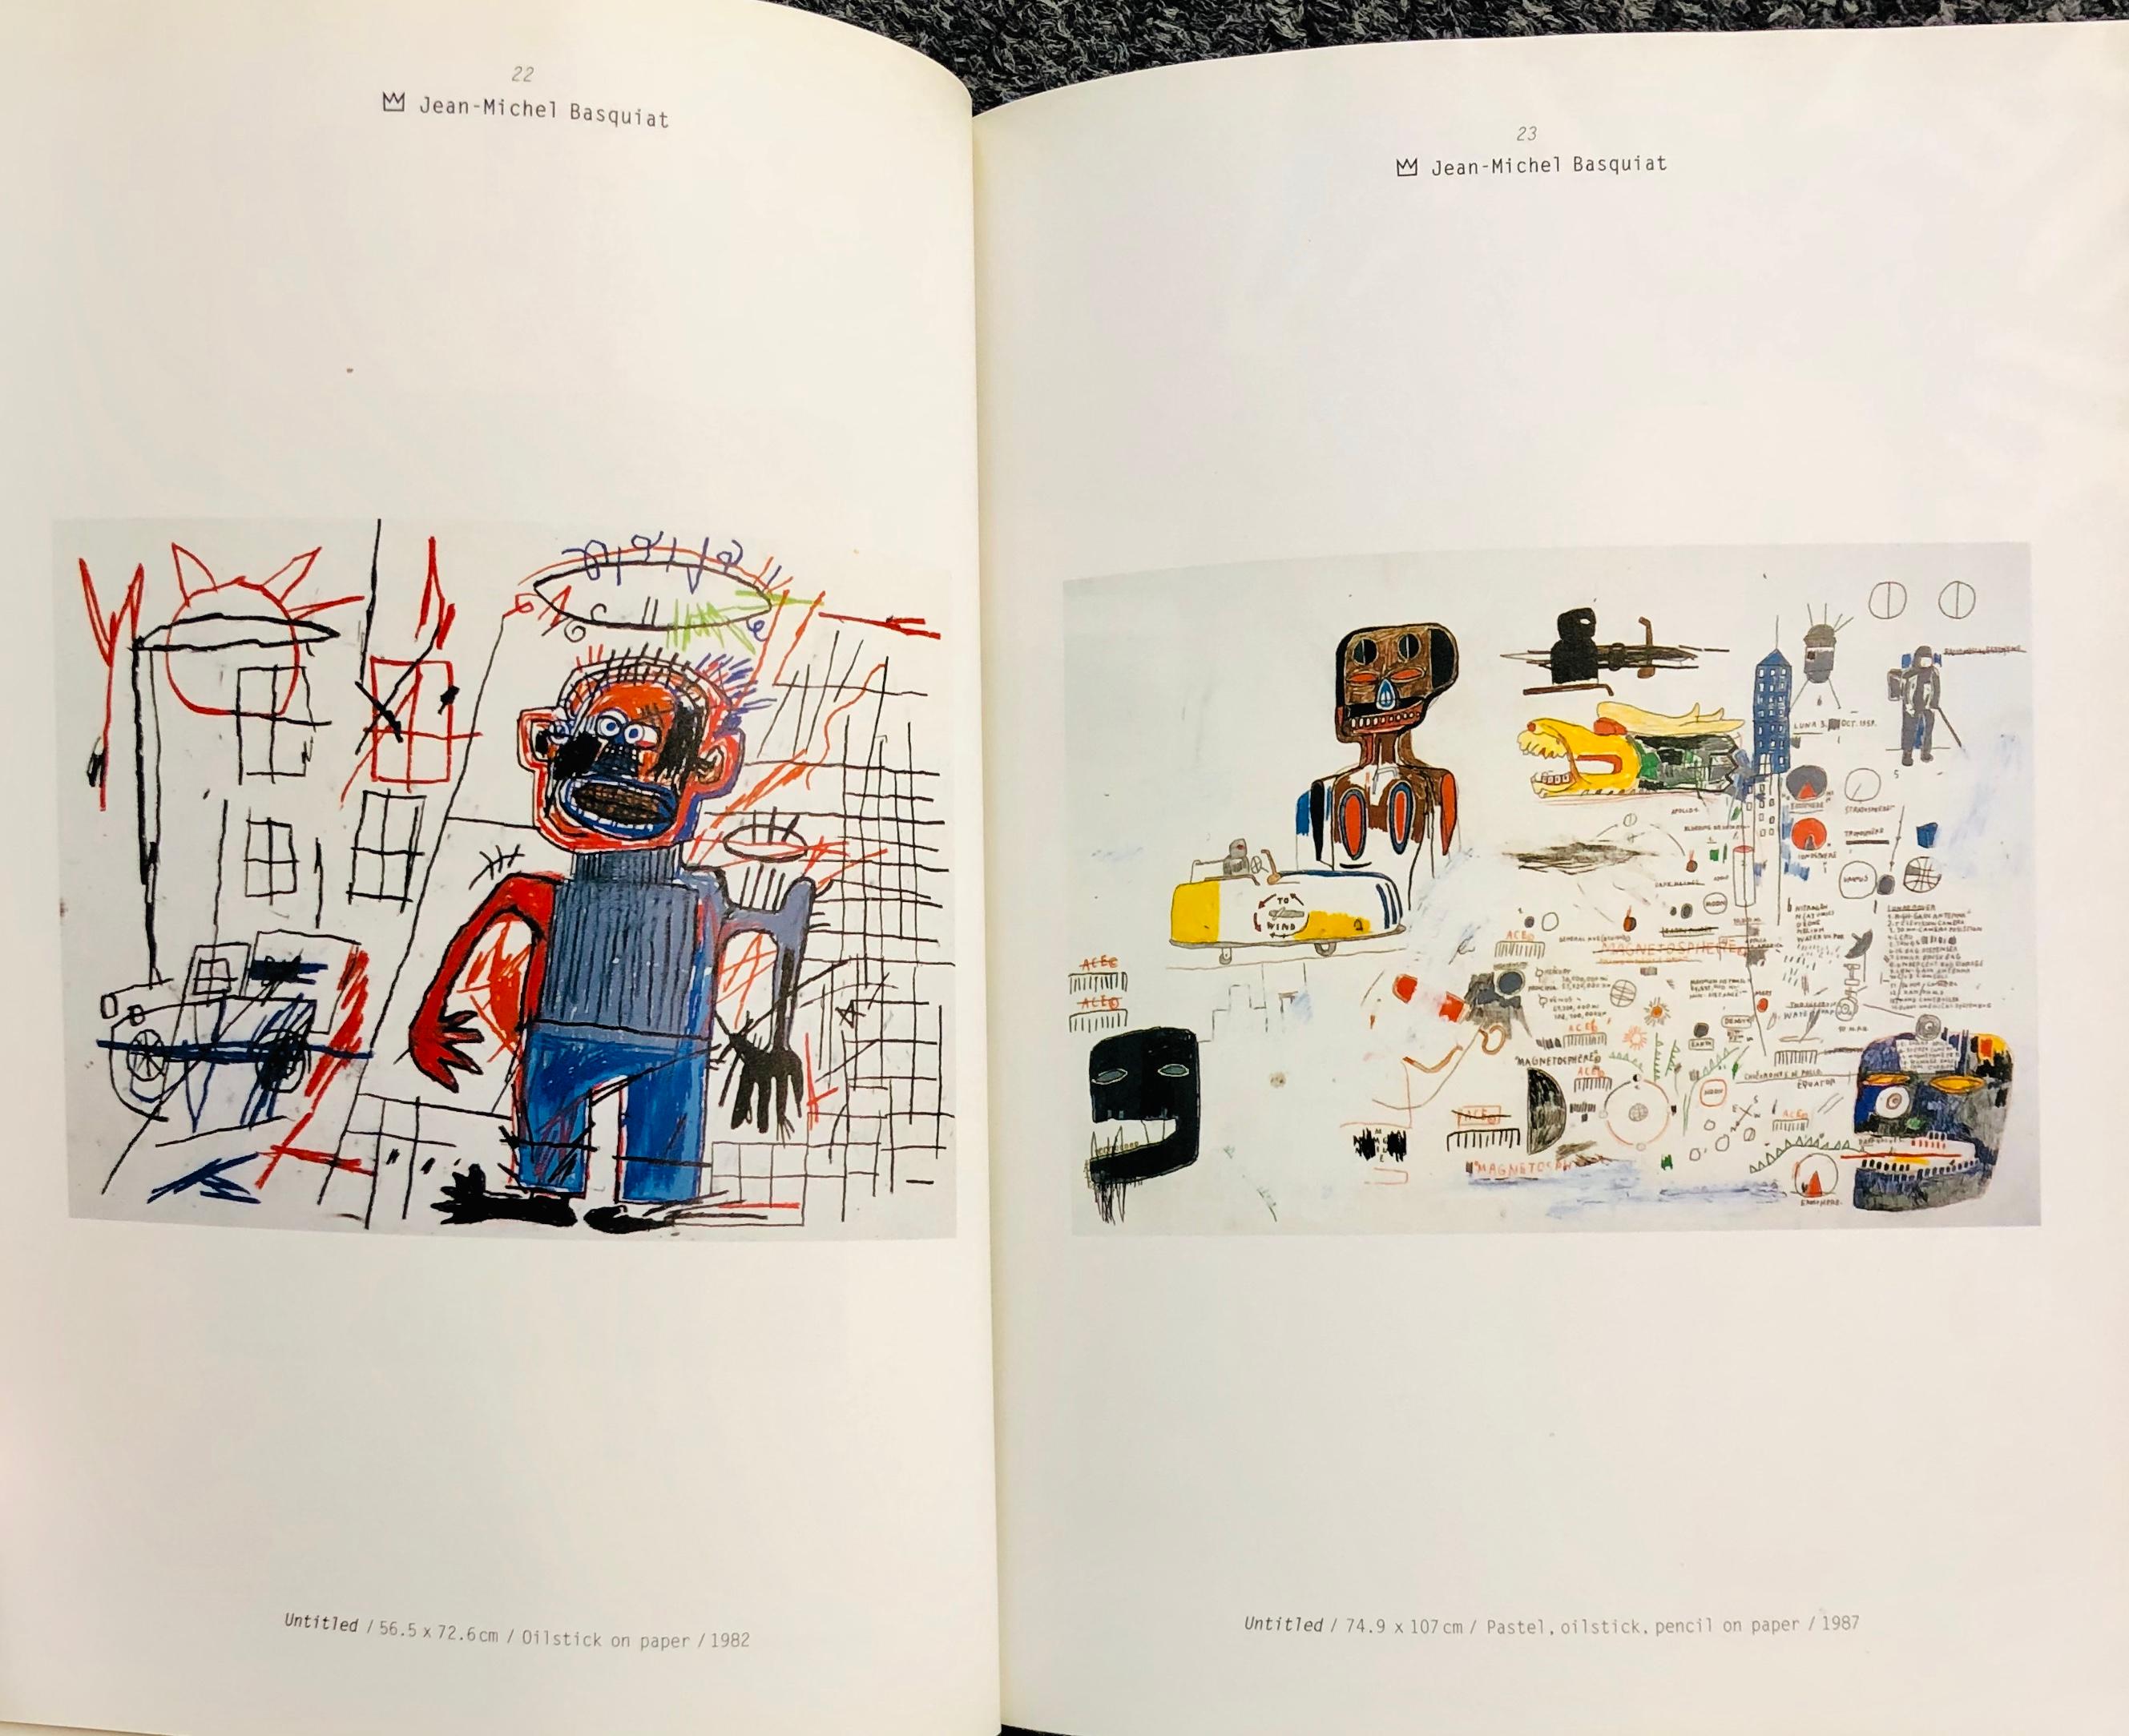 Basquiat Haring & Kenny Scharf at Lio Malca:
Rare sought after 1990s hardcover catalogue featuring works by Jean-Michel Basquiat, Keith Haring, & Kenny Scharf's from the Lio Malca collection

Hardcover, 1998
61 Pages
Text: Japanese 
Measures